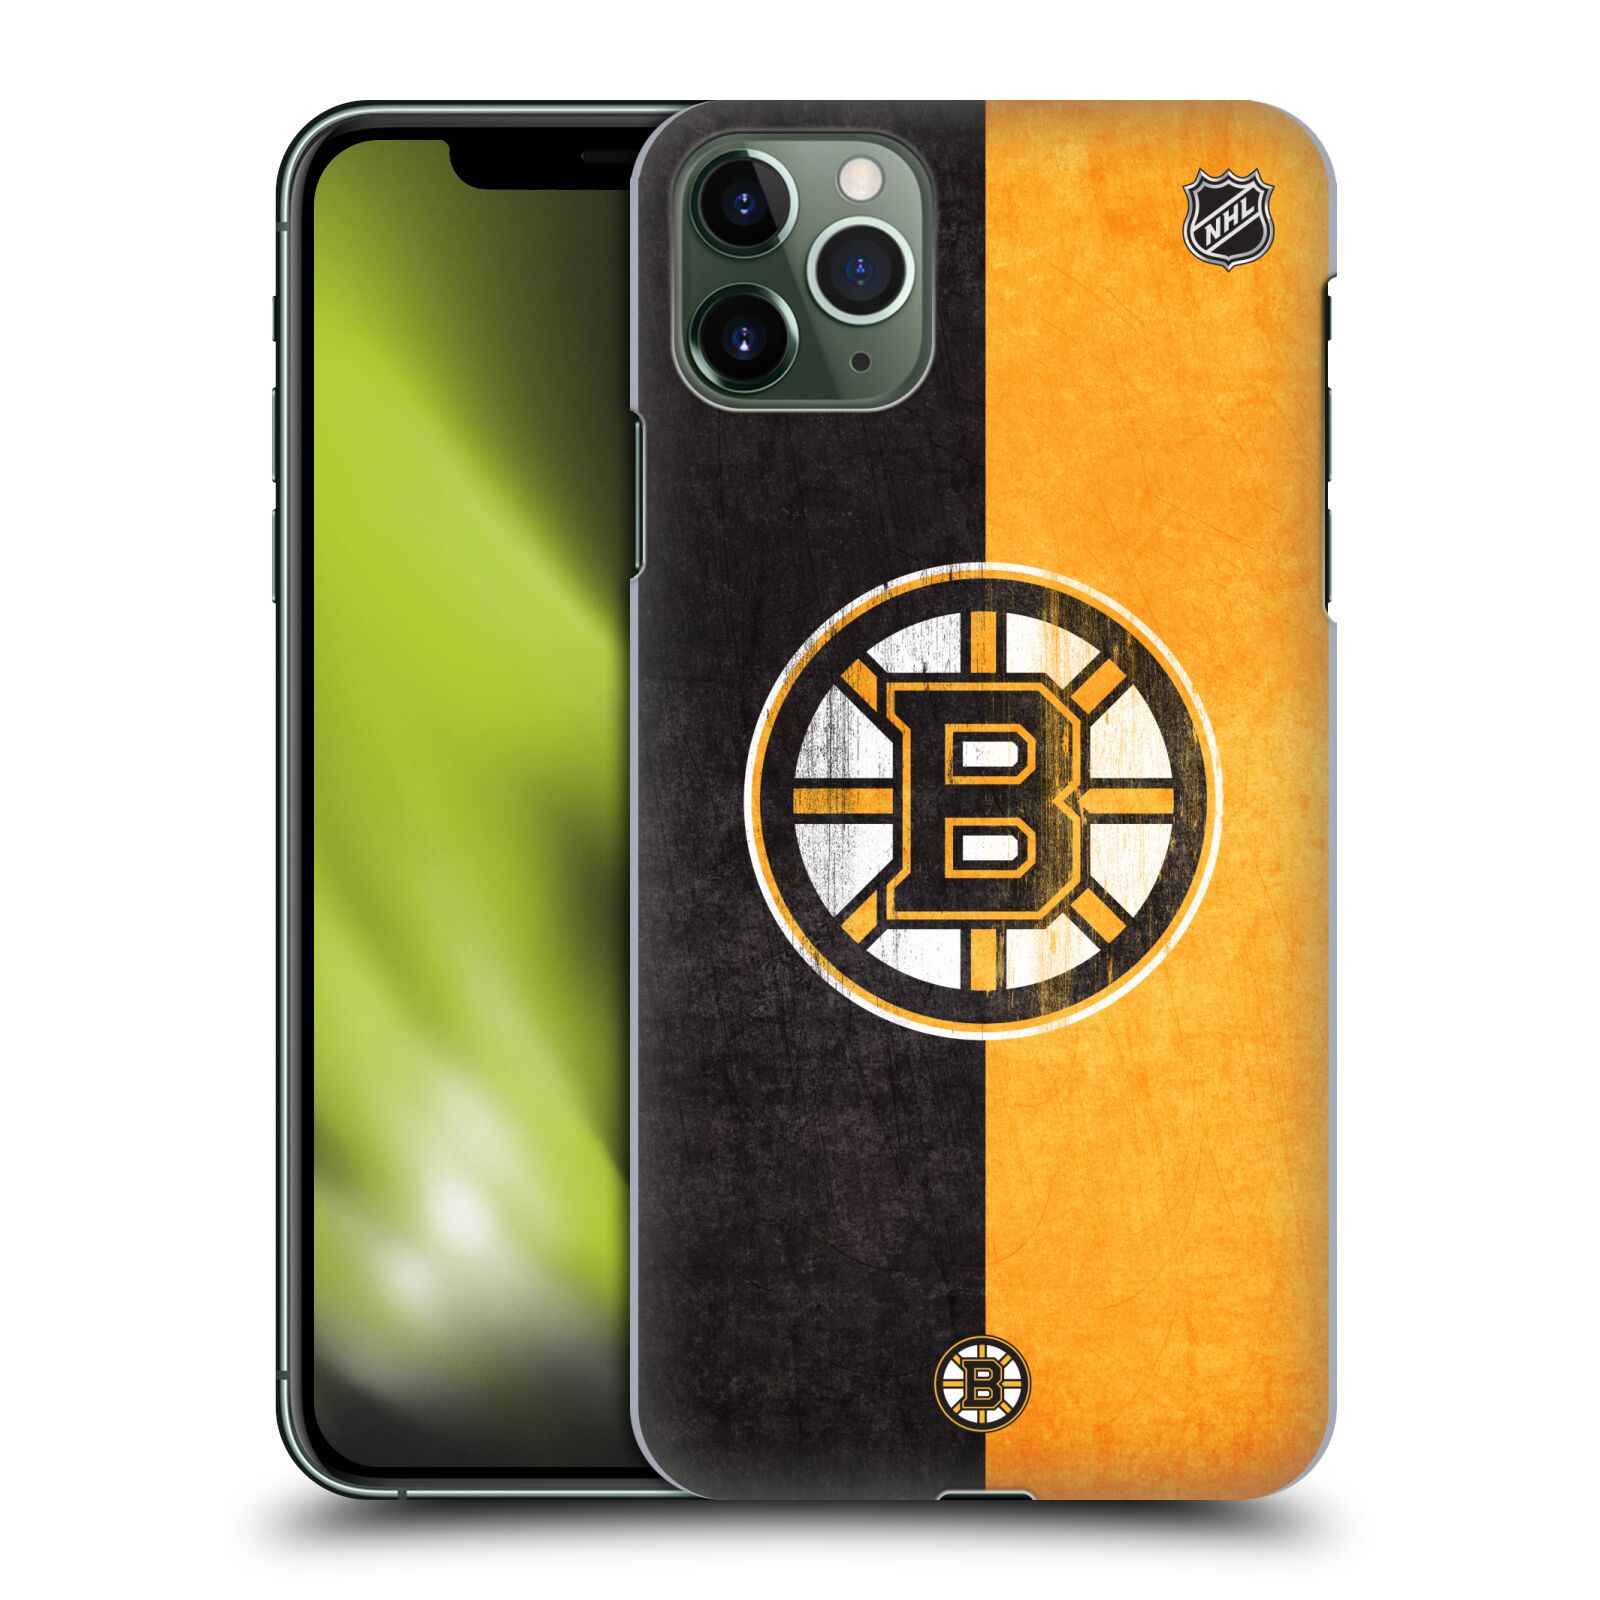 Accessories Phone Shell Case for iPhone XR Cover Ice Hockey Movement Boston Bruins Logo 